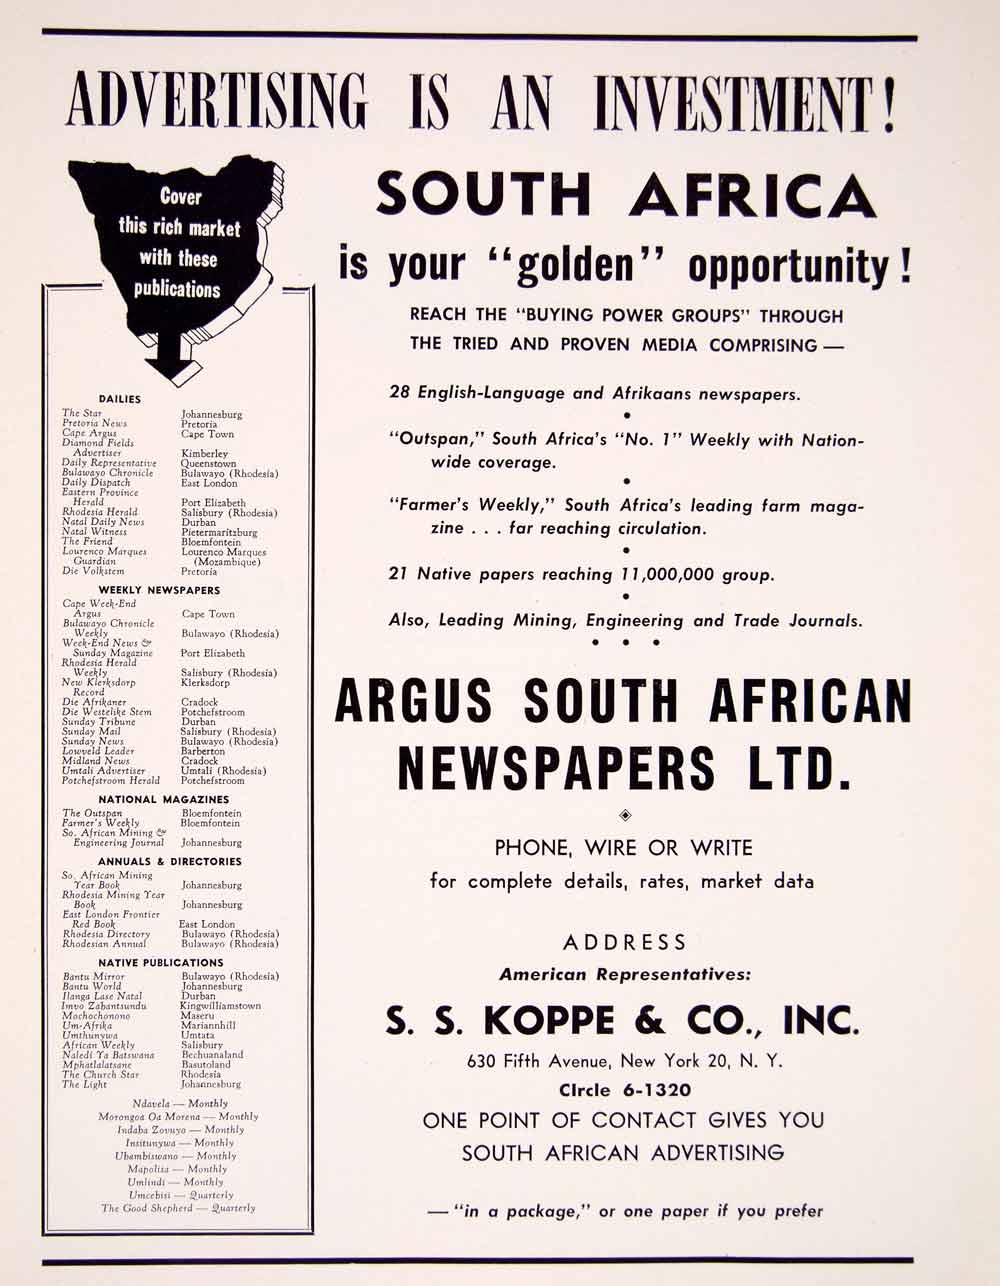 1948 Ad South African Argus Newspaper Koppe Company Dailies Magazines XGTC7